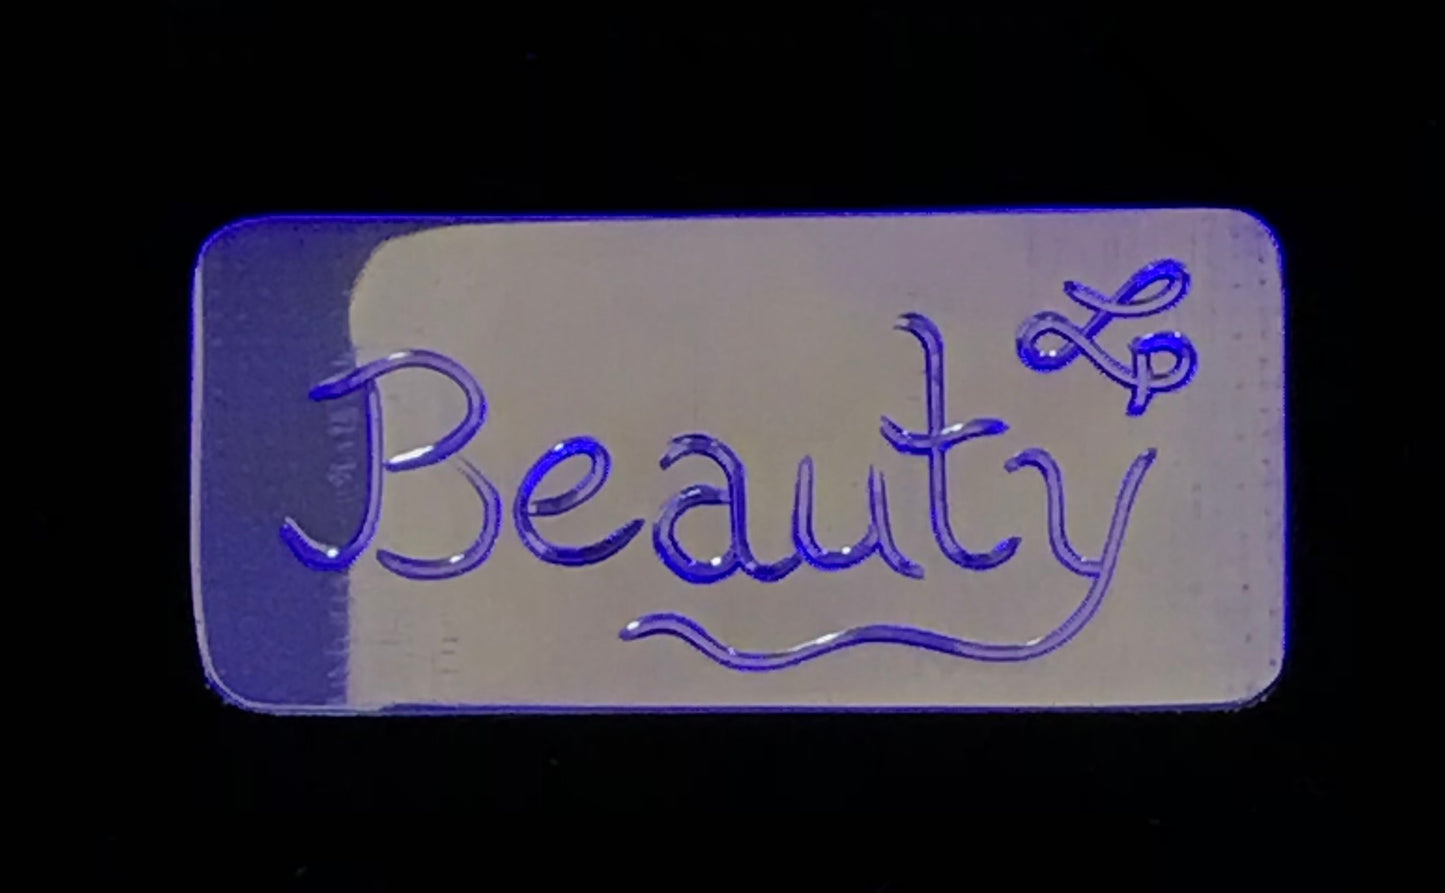 Back of Sleeping Beauty ear cuff inscribed "Beauty" by Laura Dutheil. Photo of cuff before it is formed.